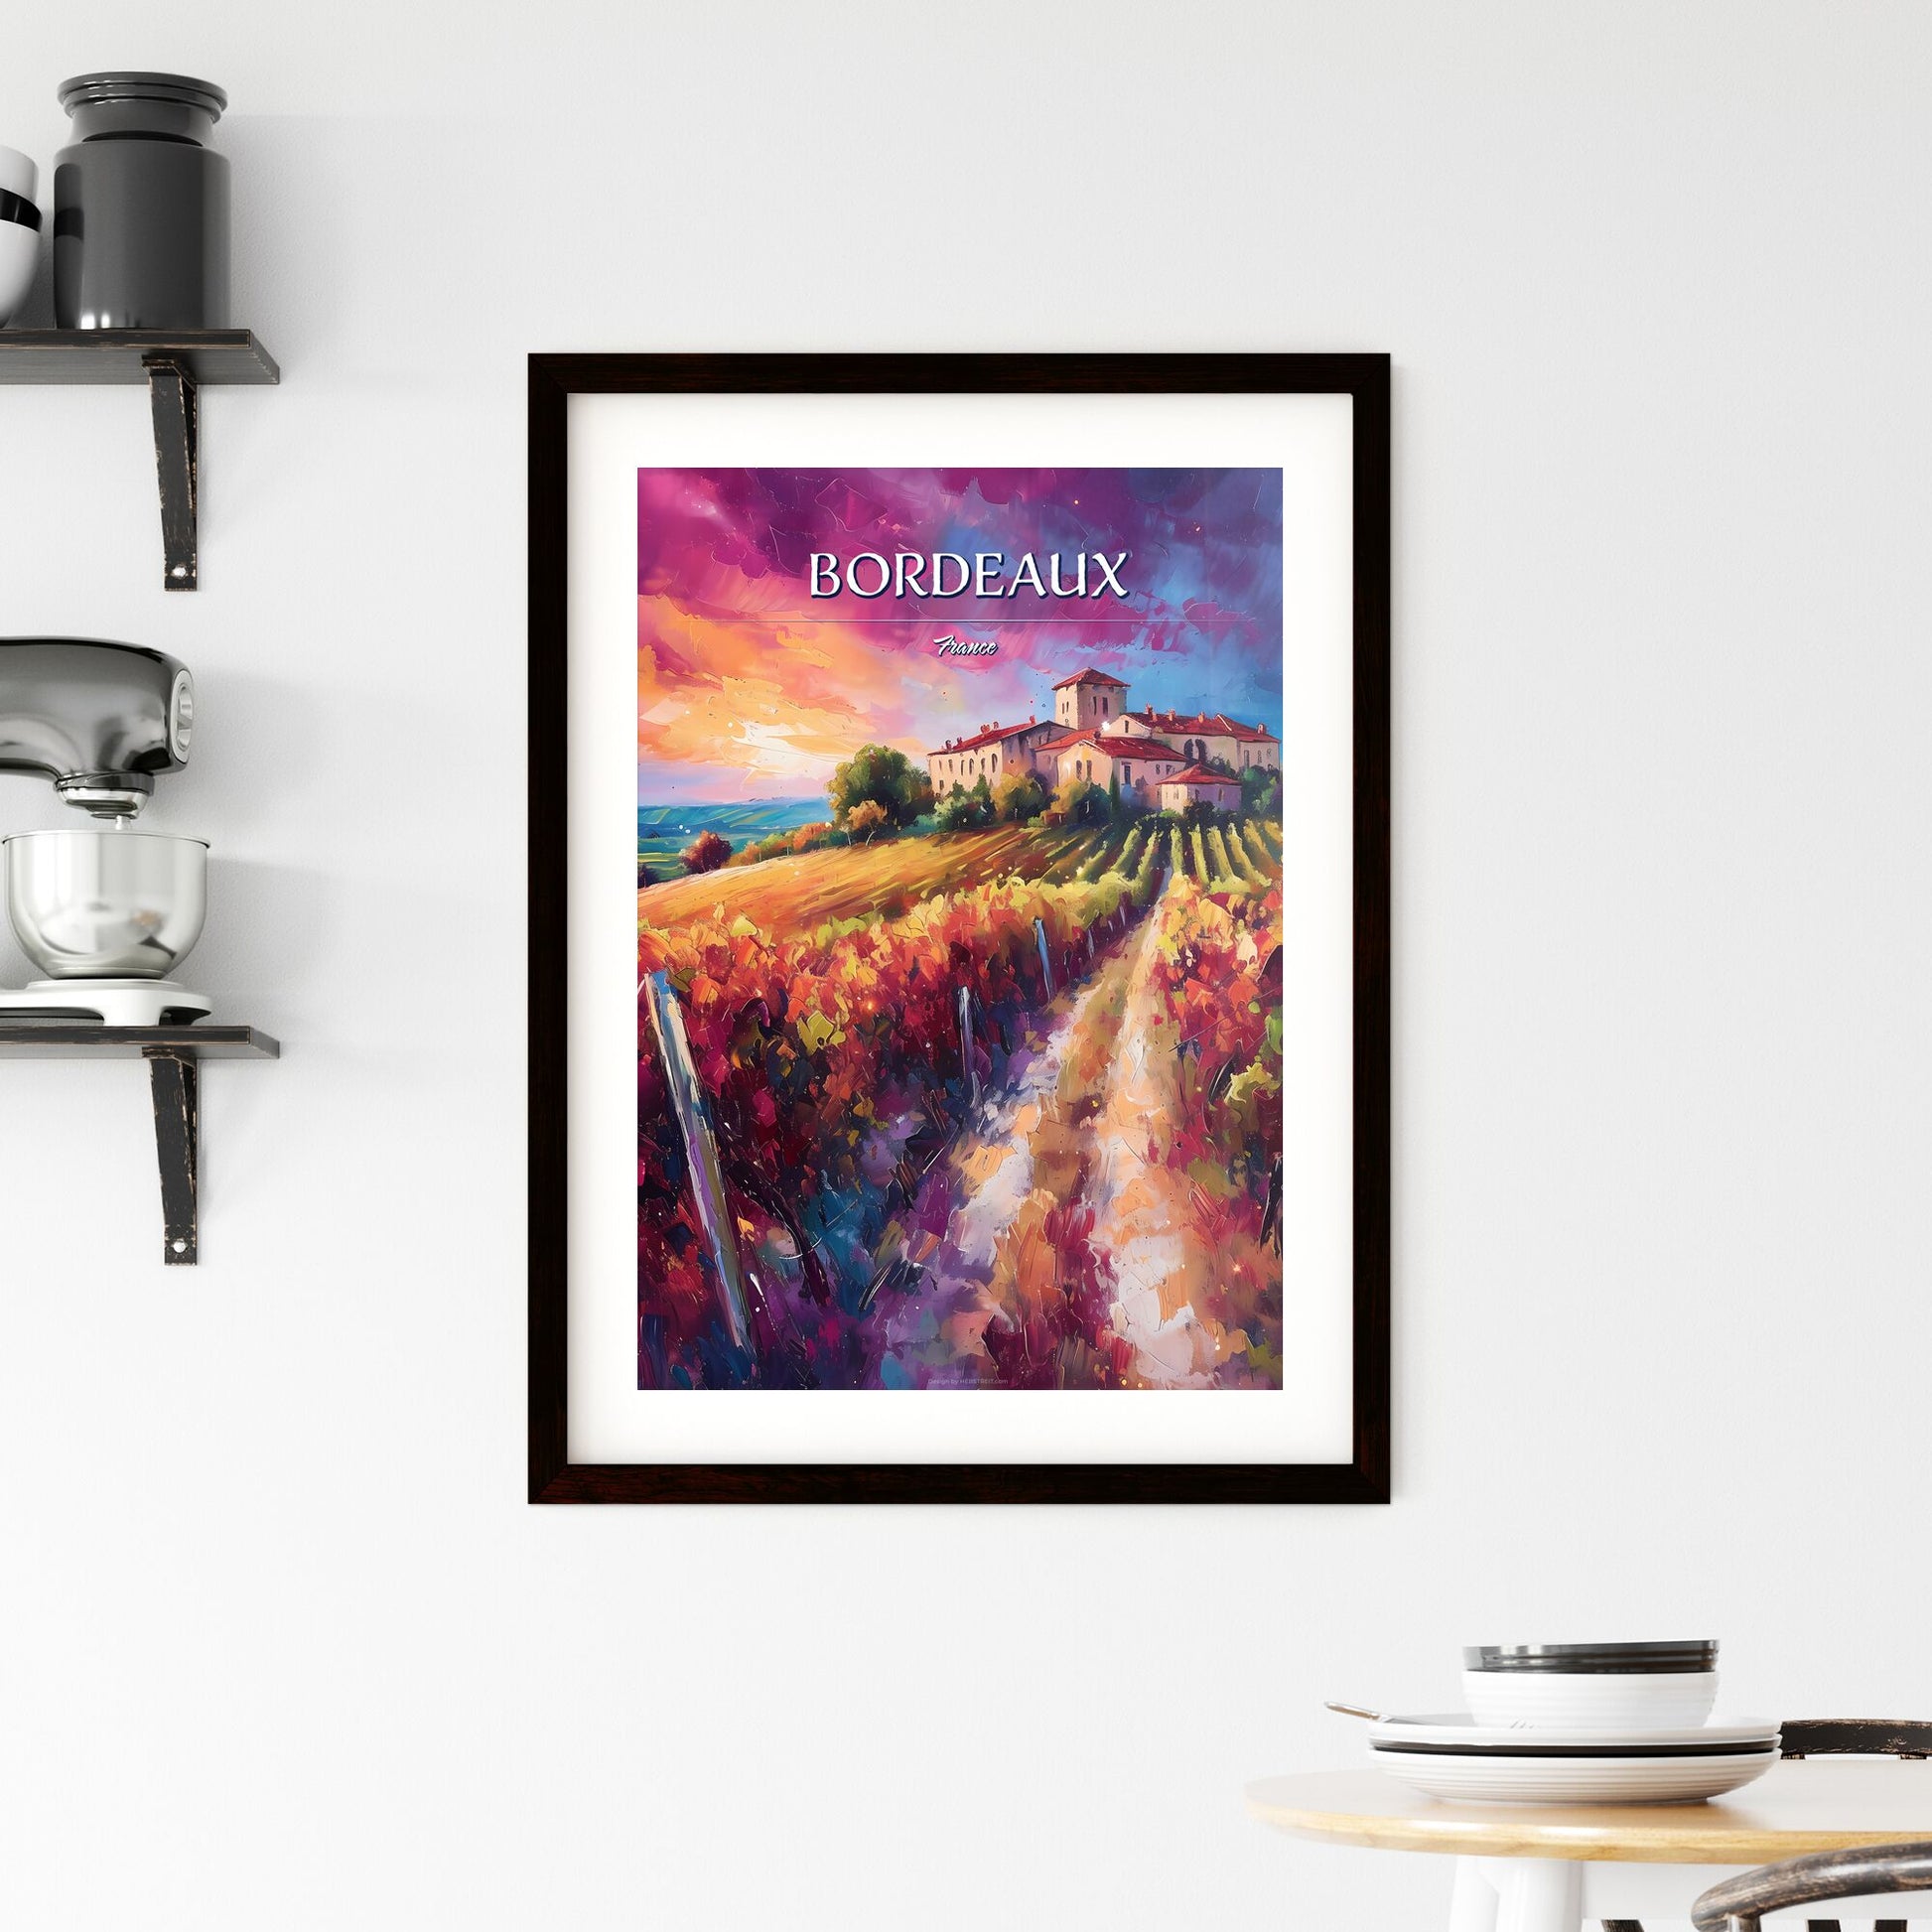 Bordeaux, France - Art print of a painting of a house in a vineyard Default Title